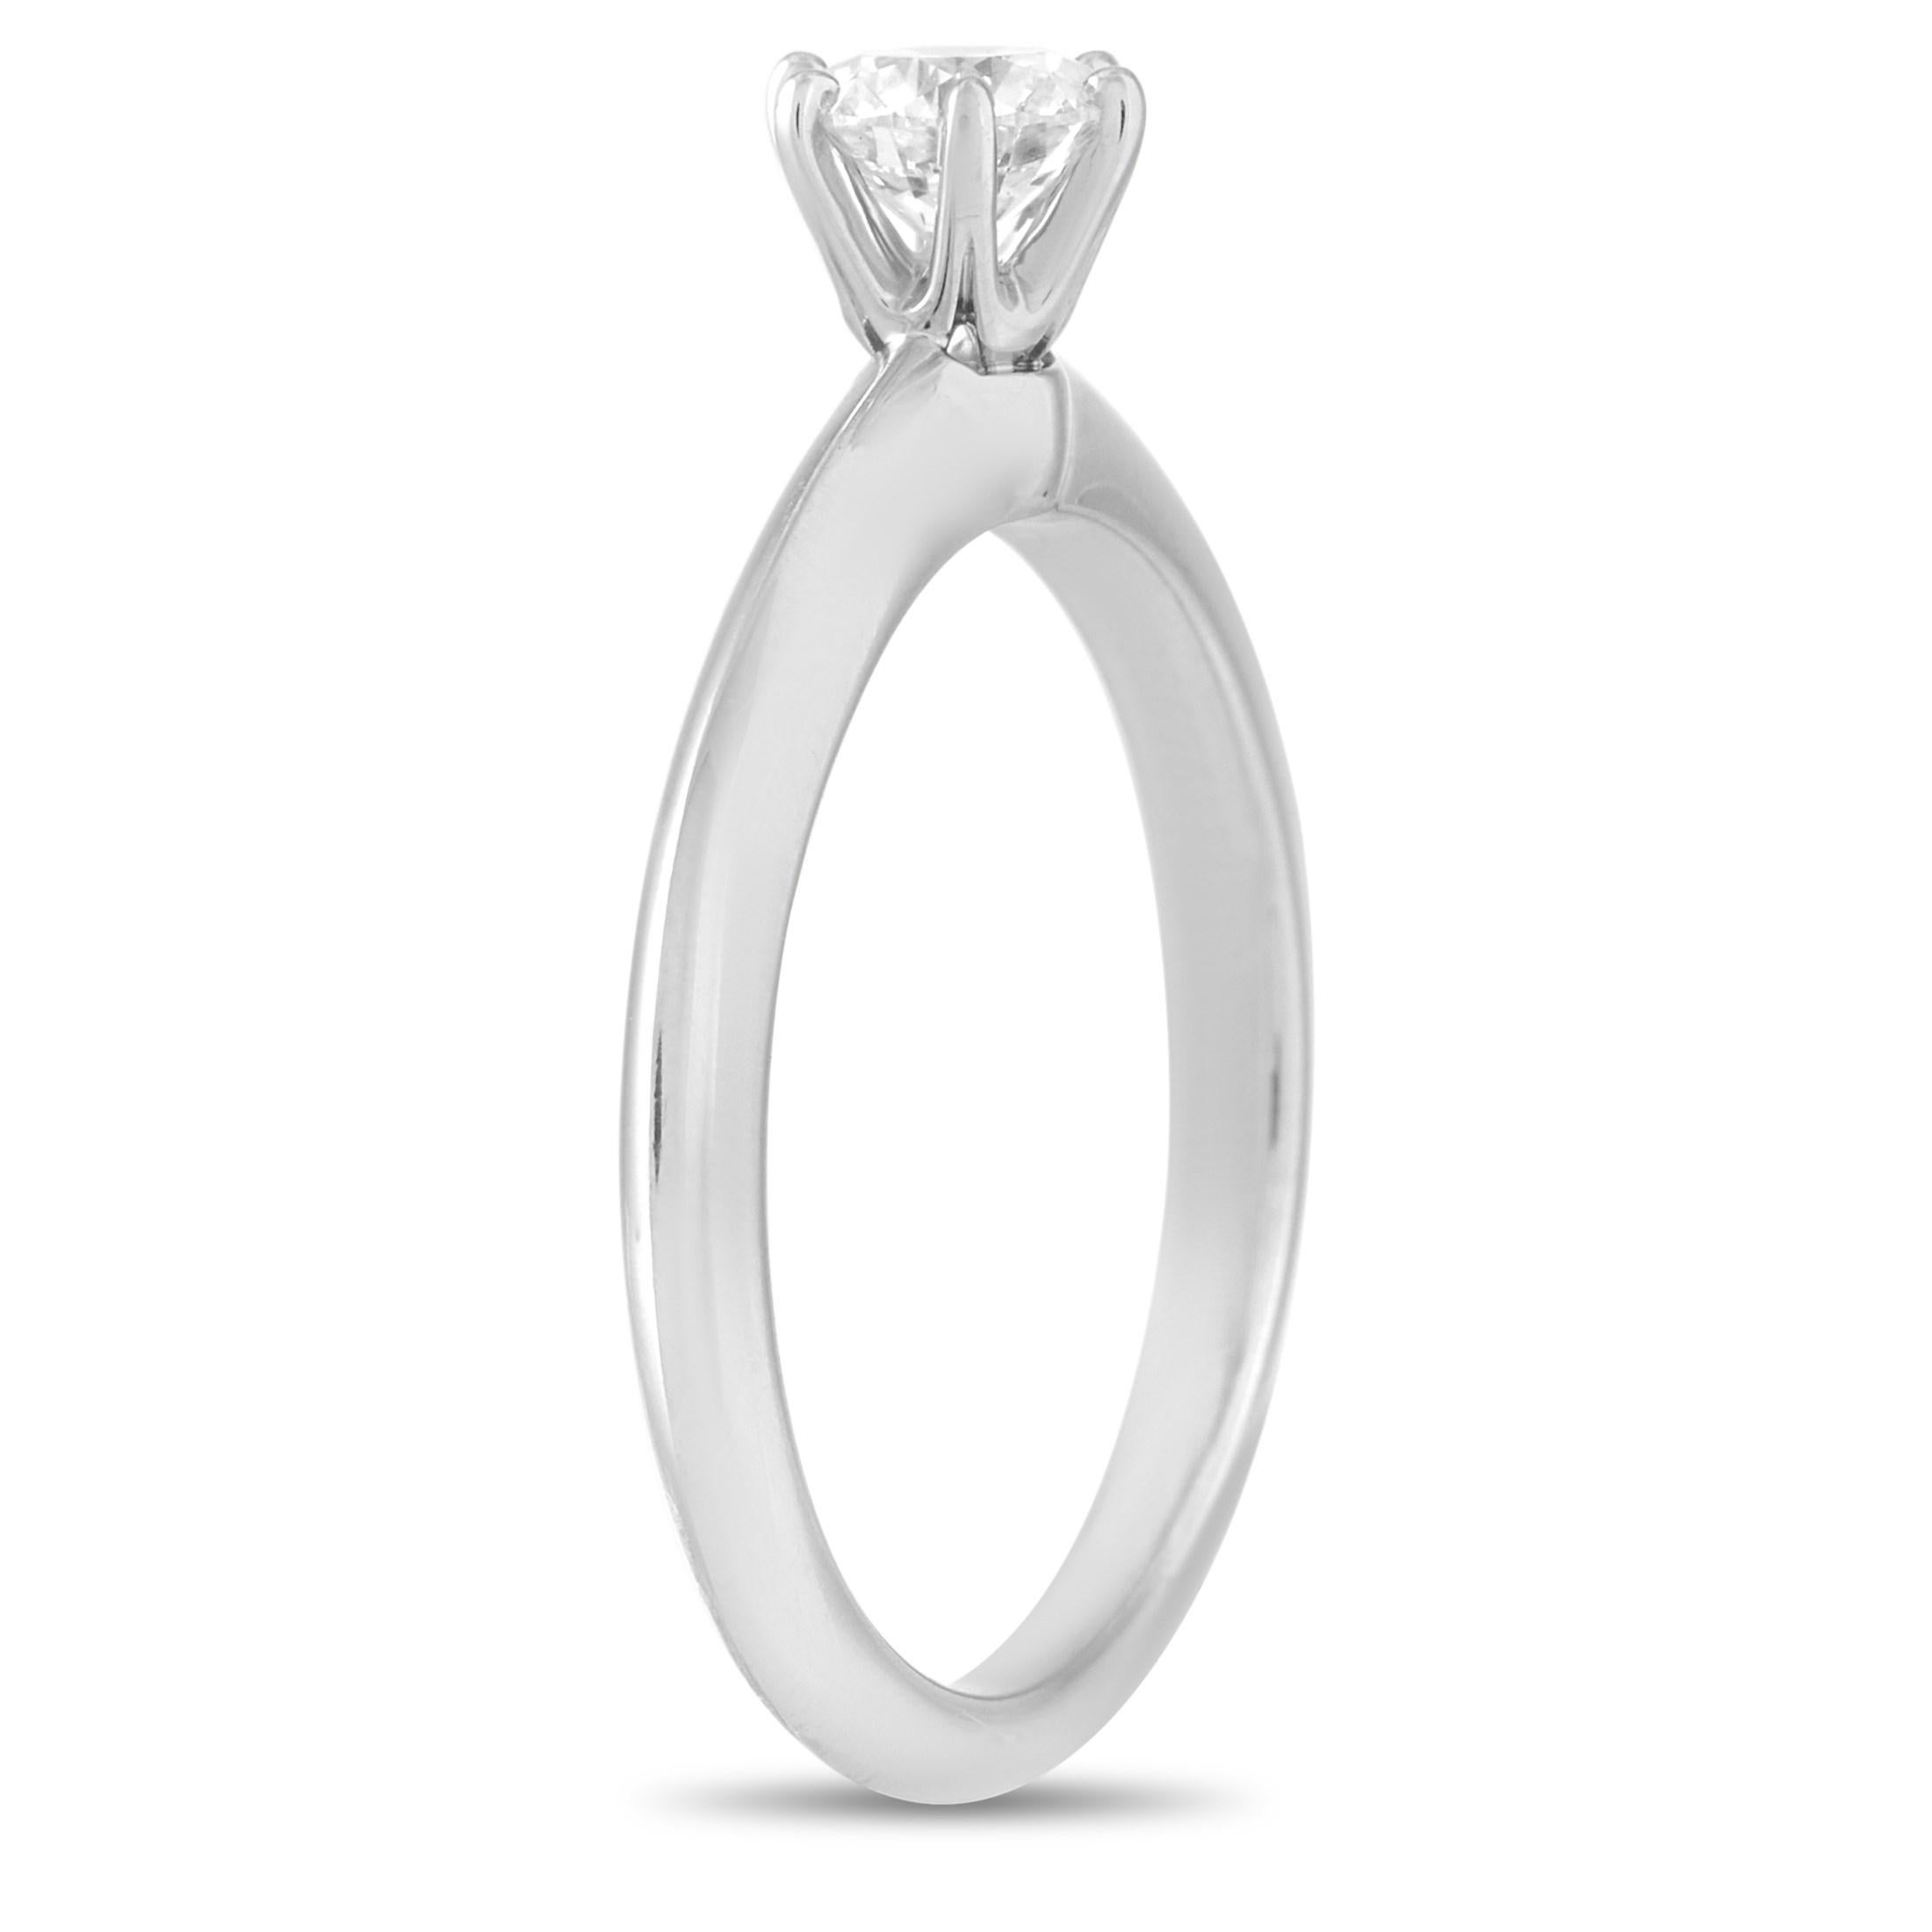 This classic Tiffany & Co. Platinum Solitaire 0.40 ct Diamond Engagement Ring is a timeless piece. The simple band is made with platinum and highlights a solitary 0.40 carat round-cut diamond of G color and VS1 clarity. The ring weighs a total of